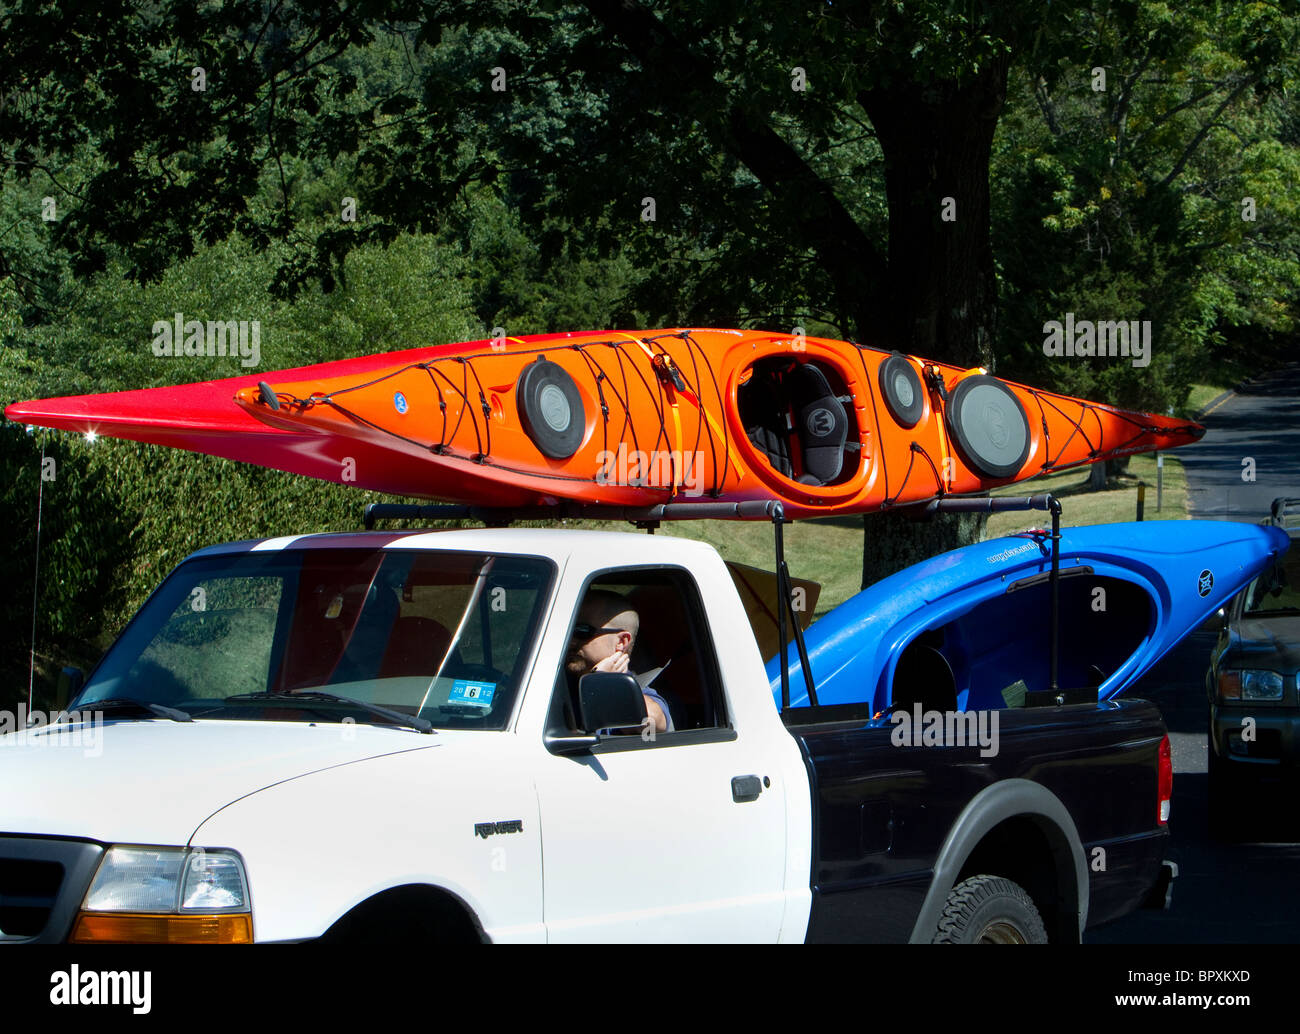 A pickup truck lorry loaded with orange and blue kayaks waiting in line to get to the boat launching area the boat ramp. Stock Photo